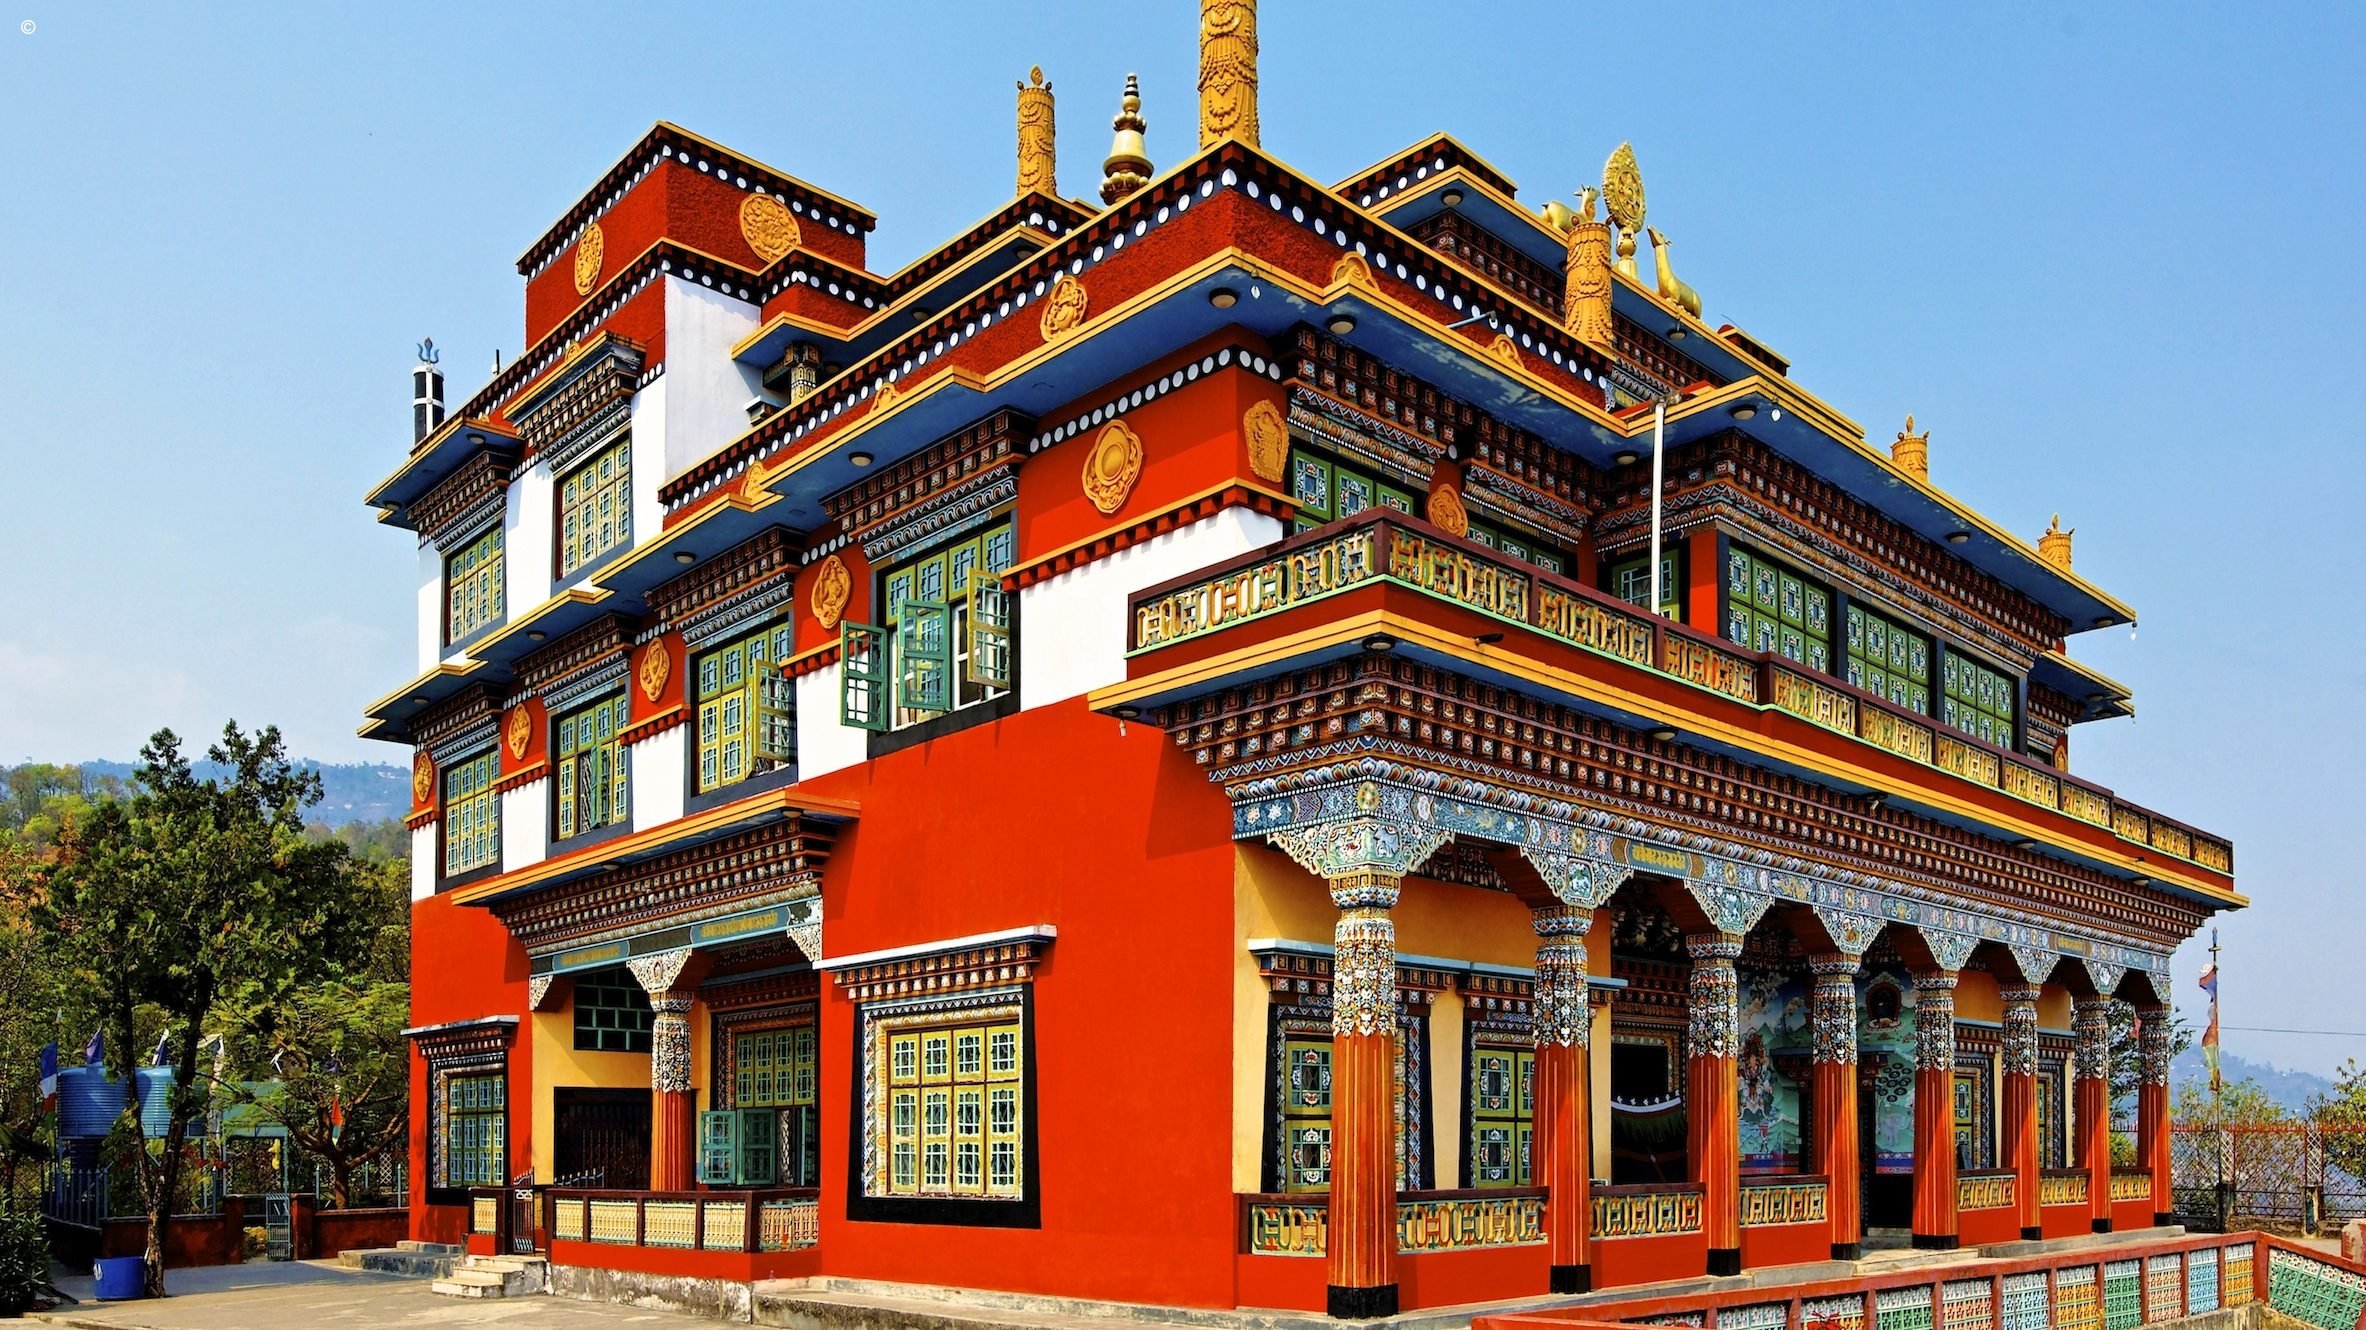  A colorful two-story Buddhist temple with intricate carvings and statues of deities.